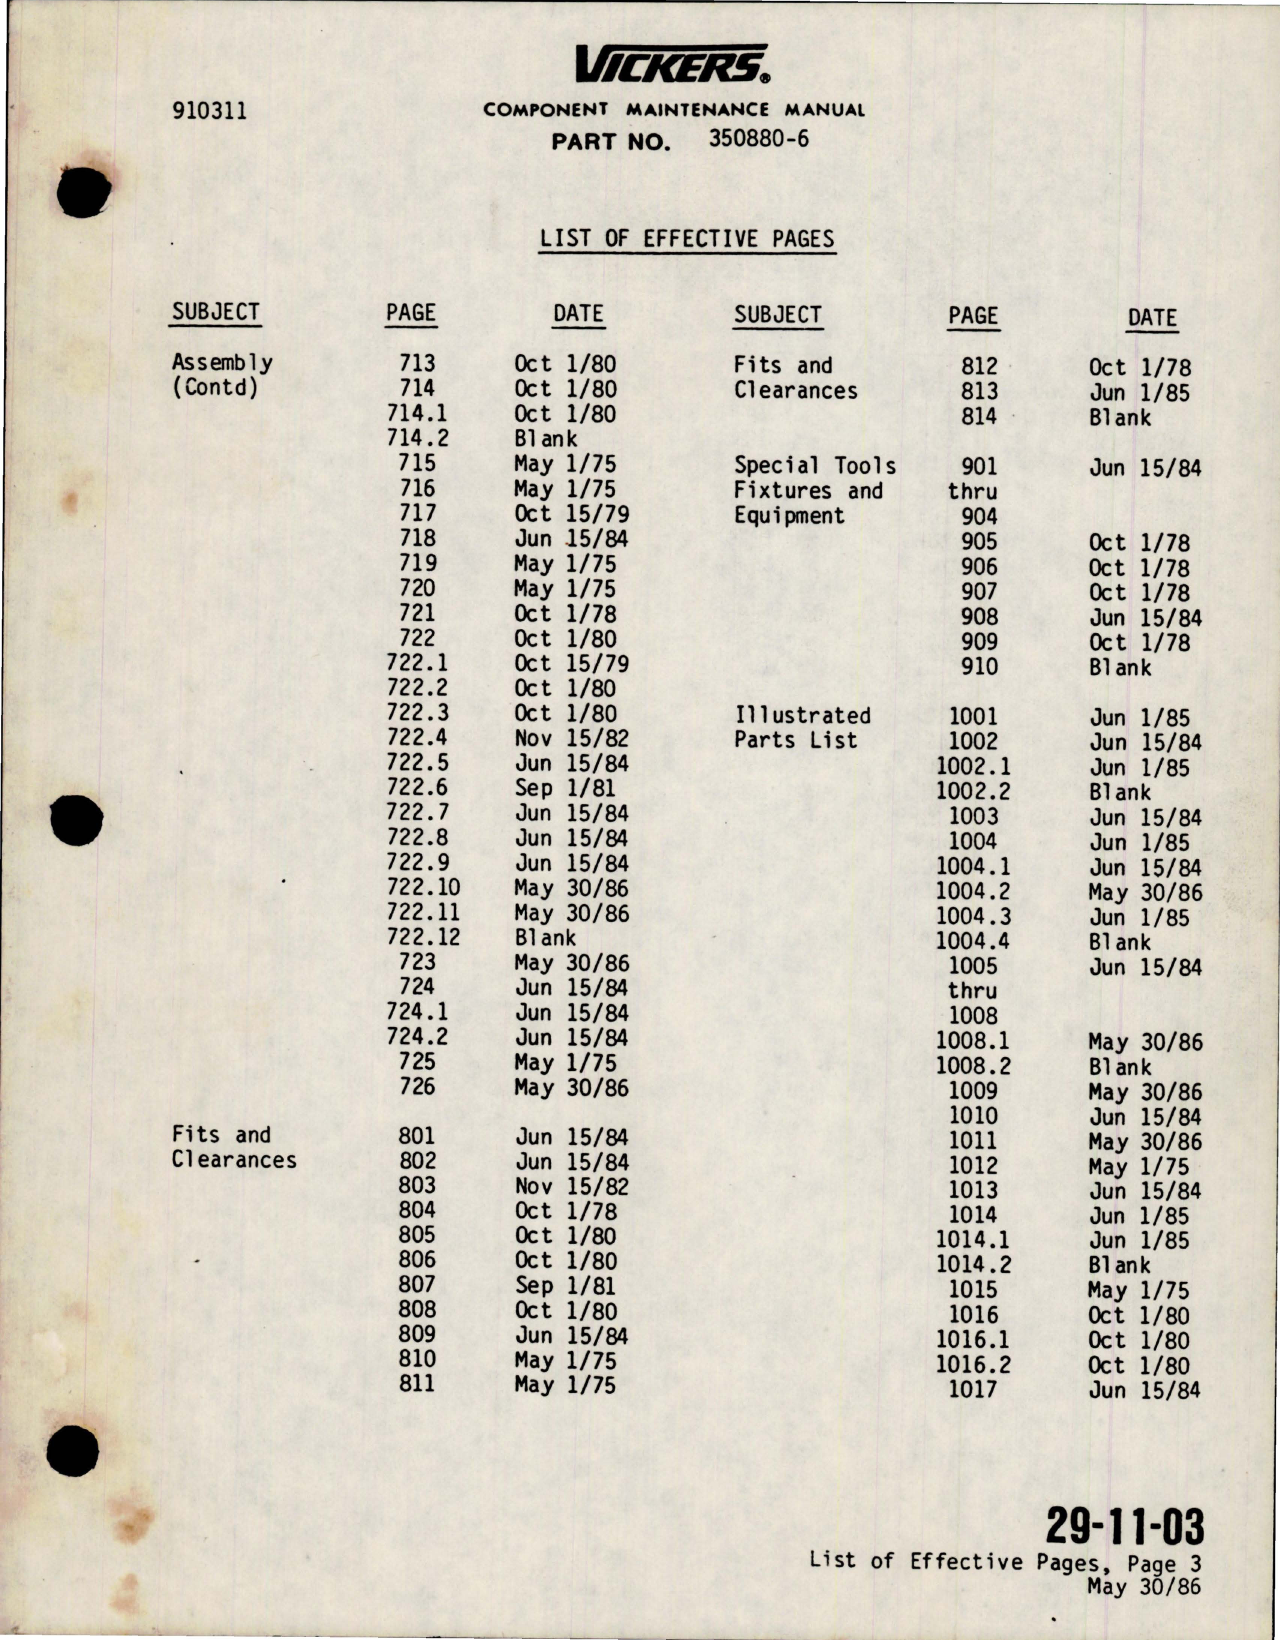 Sample page 7 from AirCorps Library document: Maintenance Manual with Parts List for Variable Displacement Hydraulic Pump - Parts 350880-6 and 623272